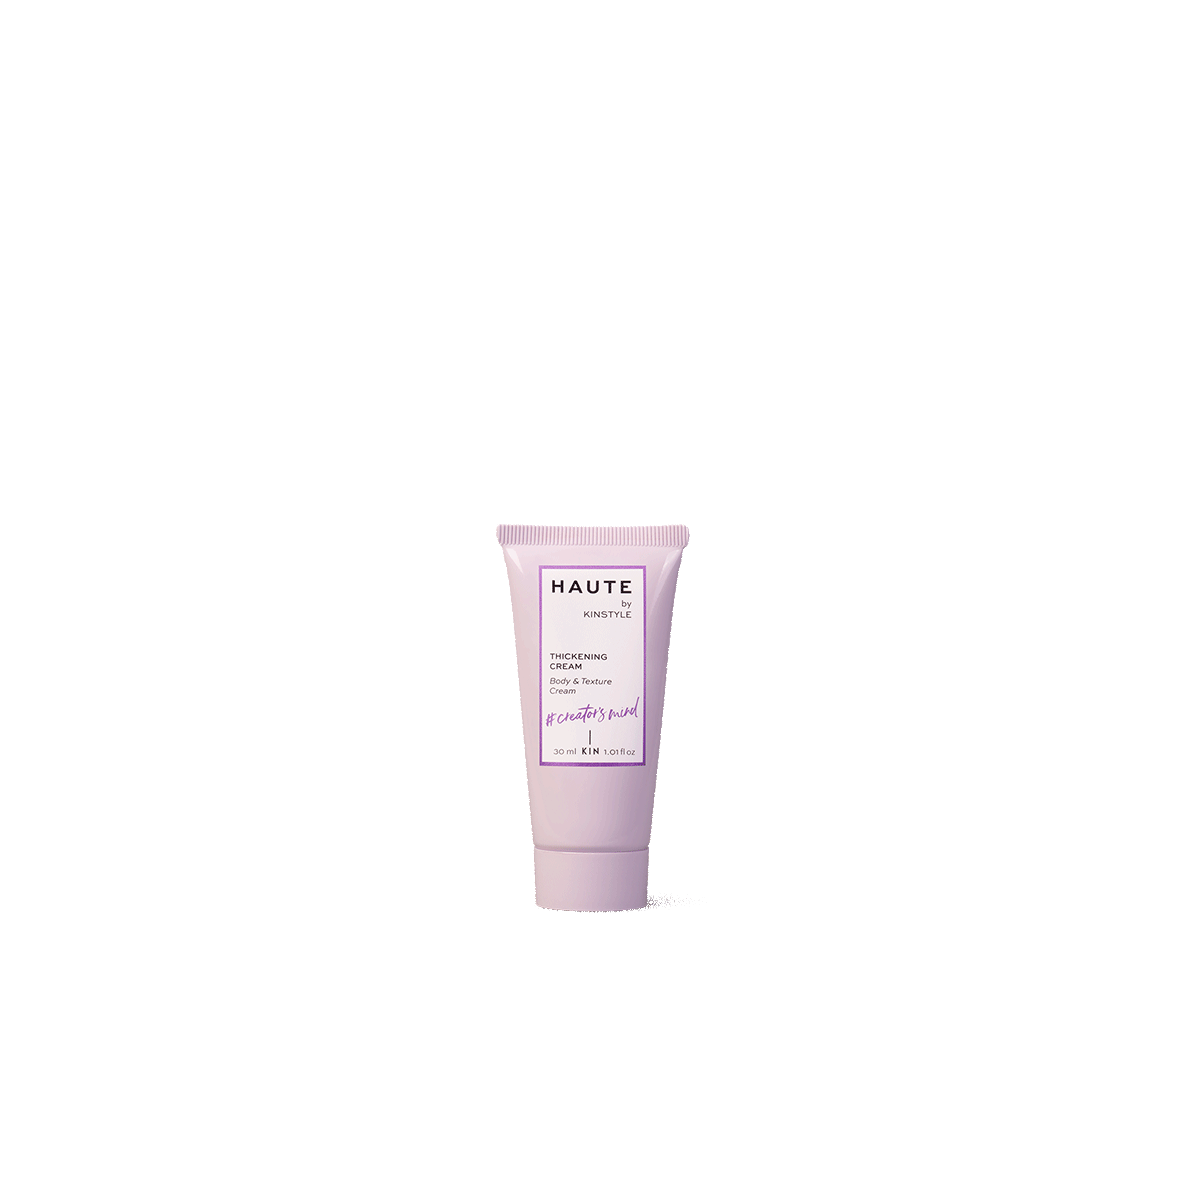 Haute by Kinstyle Thickening Cream